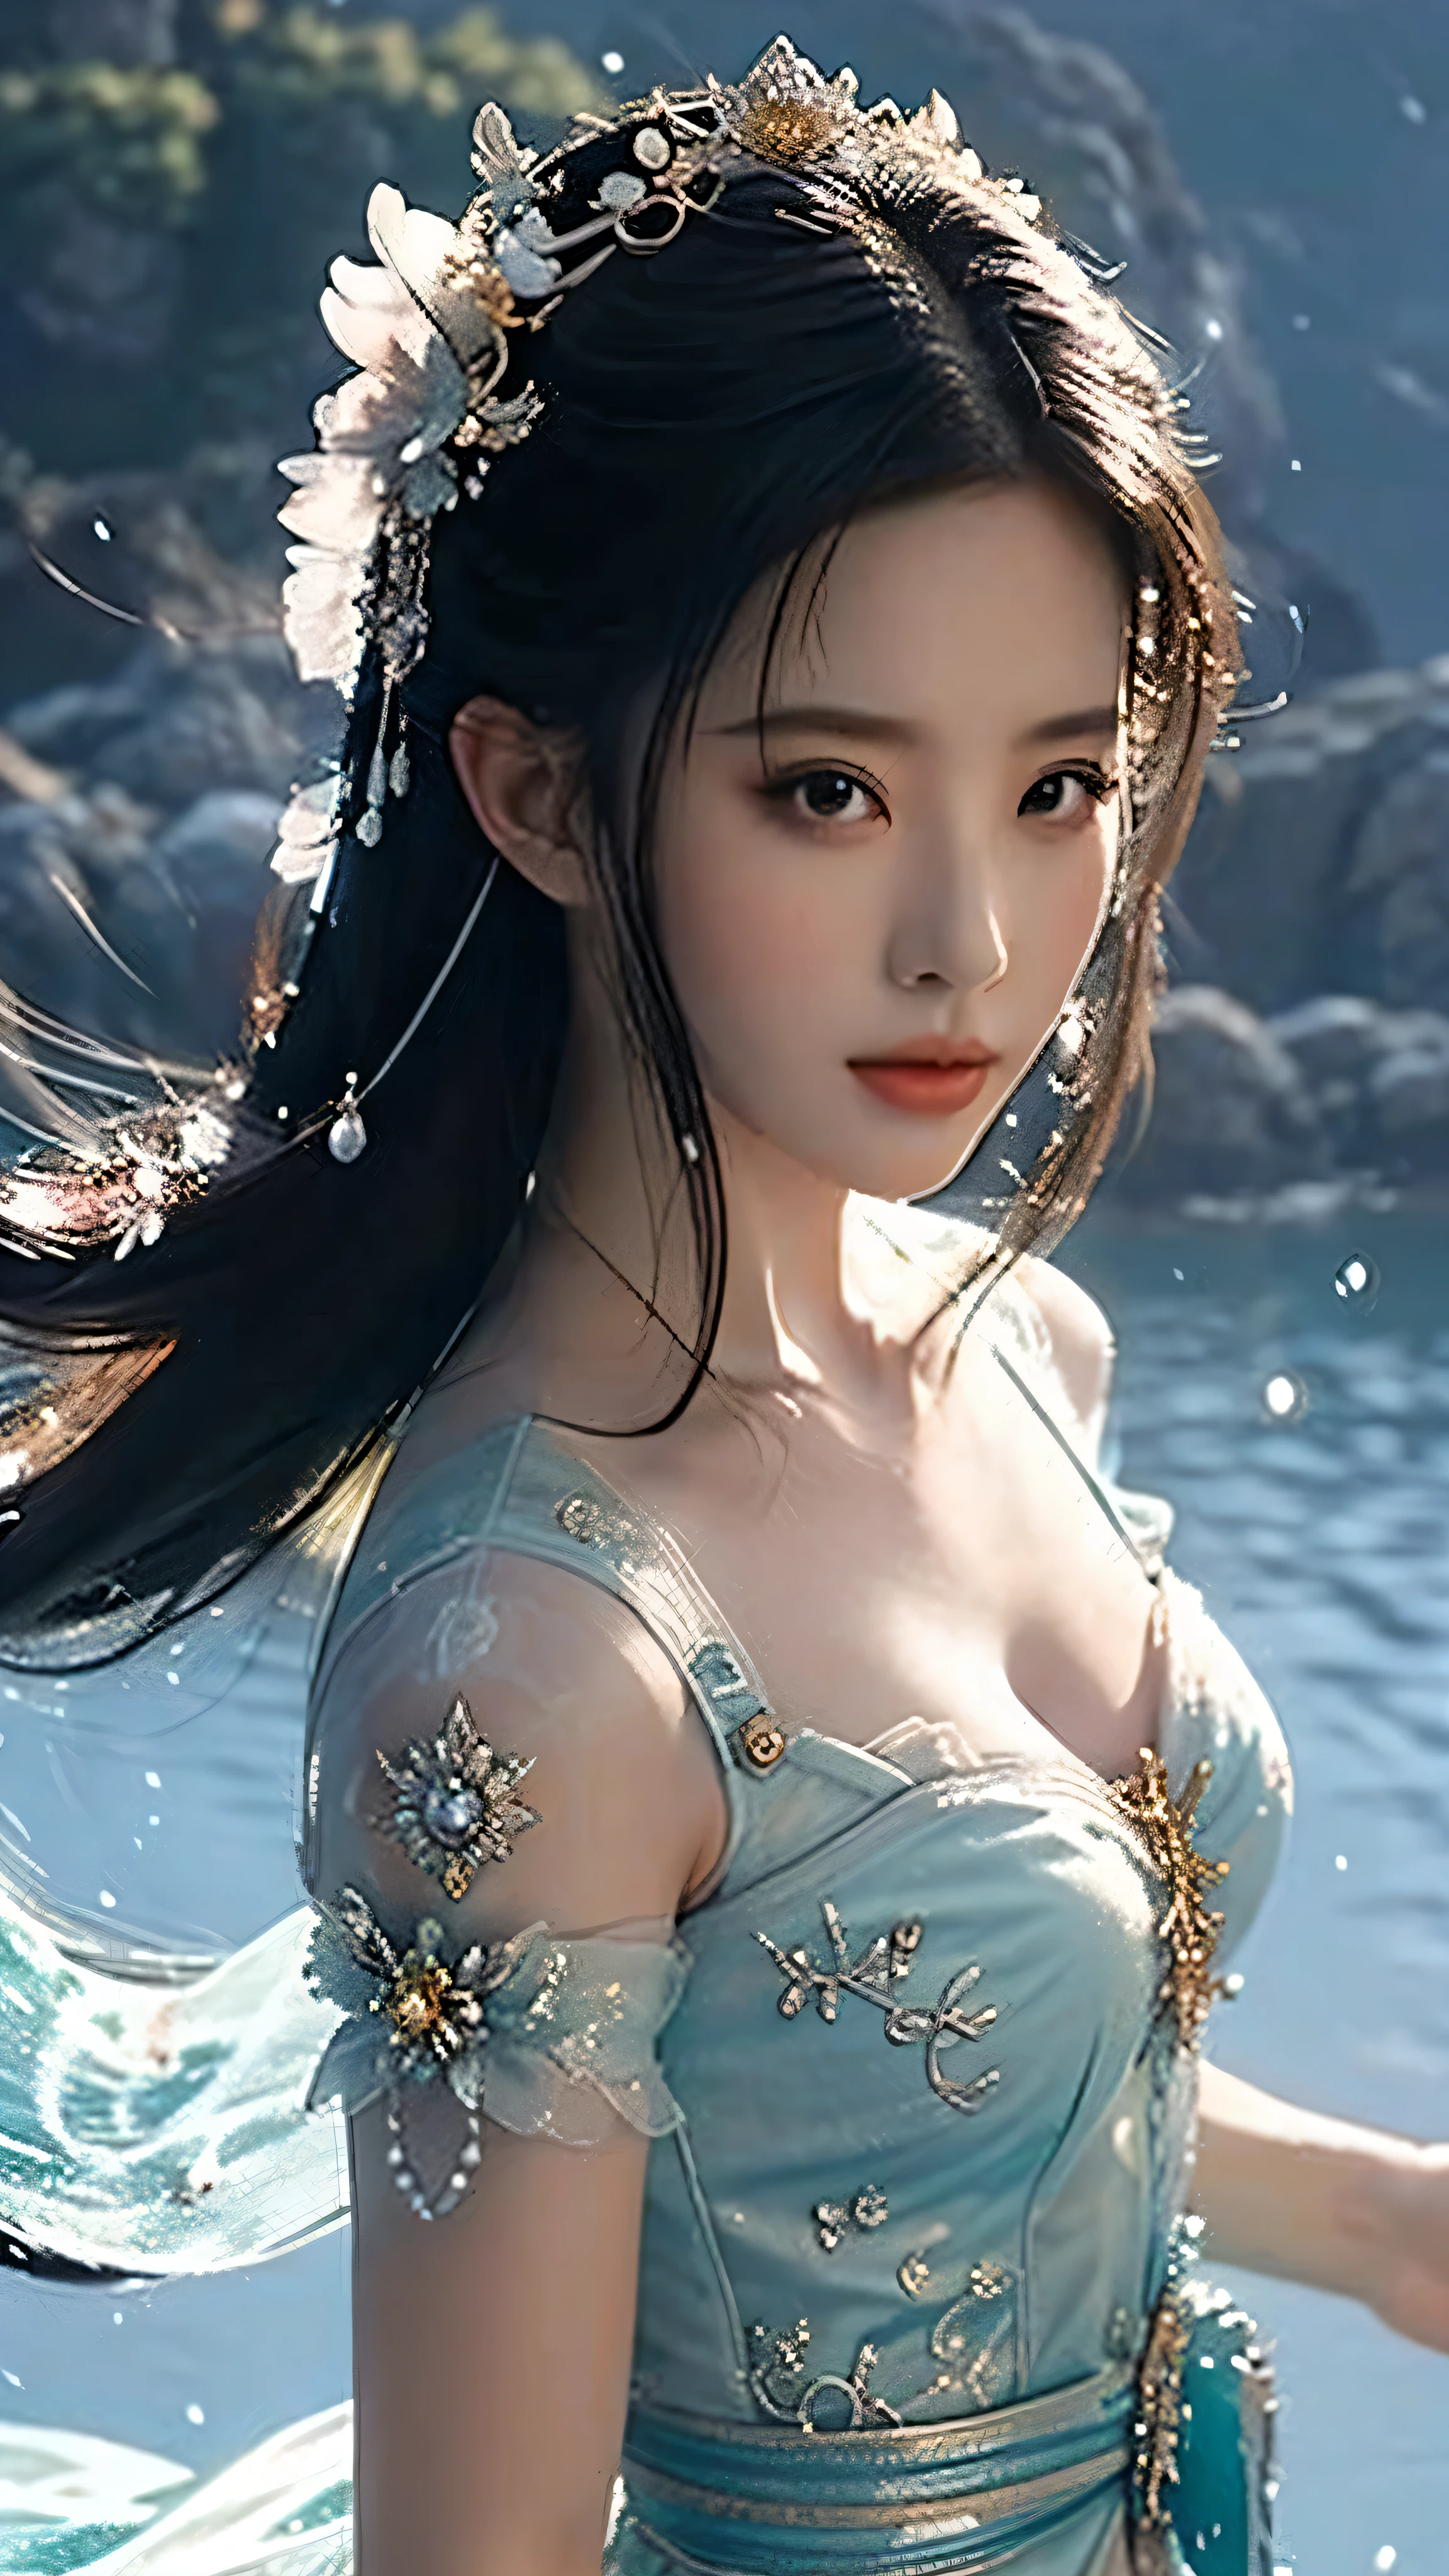 masterpiece, best quality, illustration, Super detailed, fine details, high resolution, 8k wallpaper, Arapei wearing a blue and white dress standing in the water, Anime girl walking on water, Close-up fantasy of water magic, Azure Lane style, Popular topics on cgstation, Anime Girls Cosplay, serafina ali kda, Splash art anime , cgstation trends, realistic water, water fairy, WLOP 和 Sakimichan